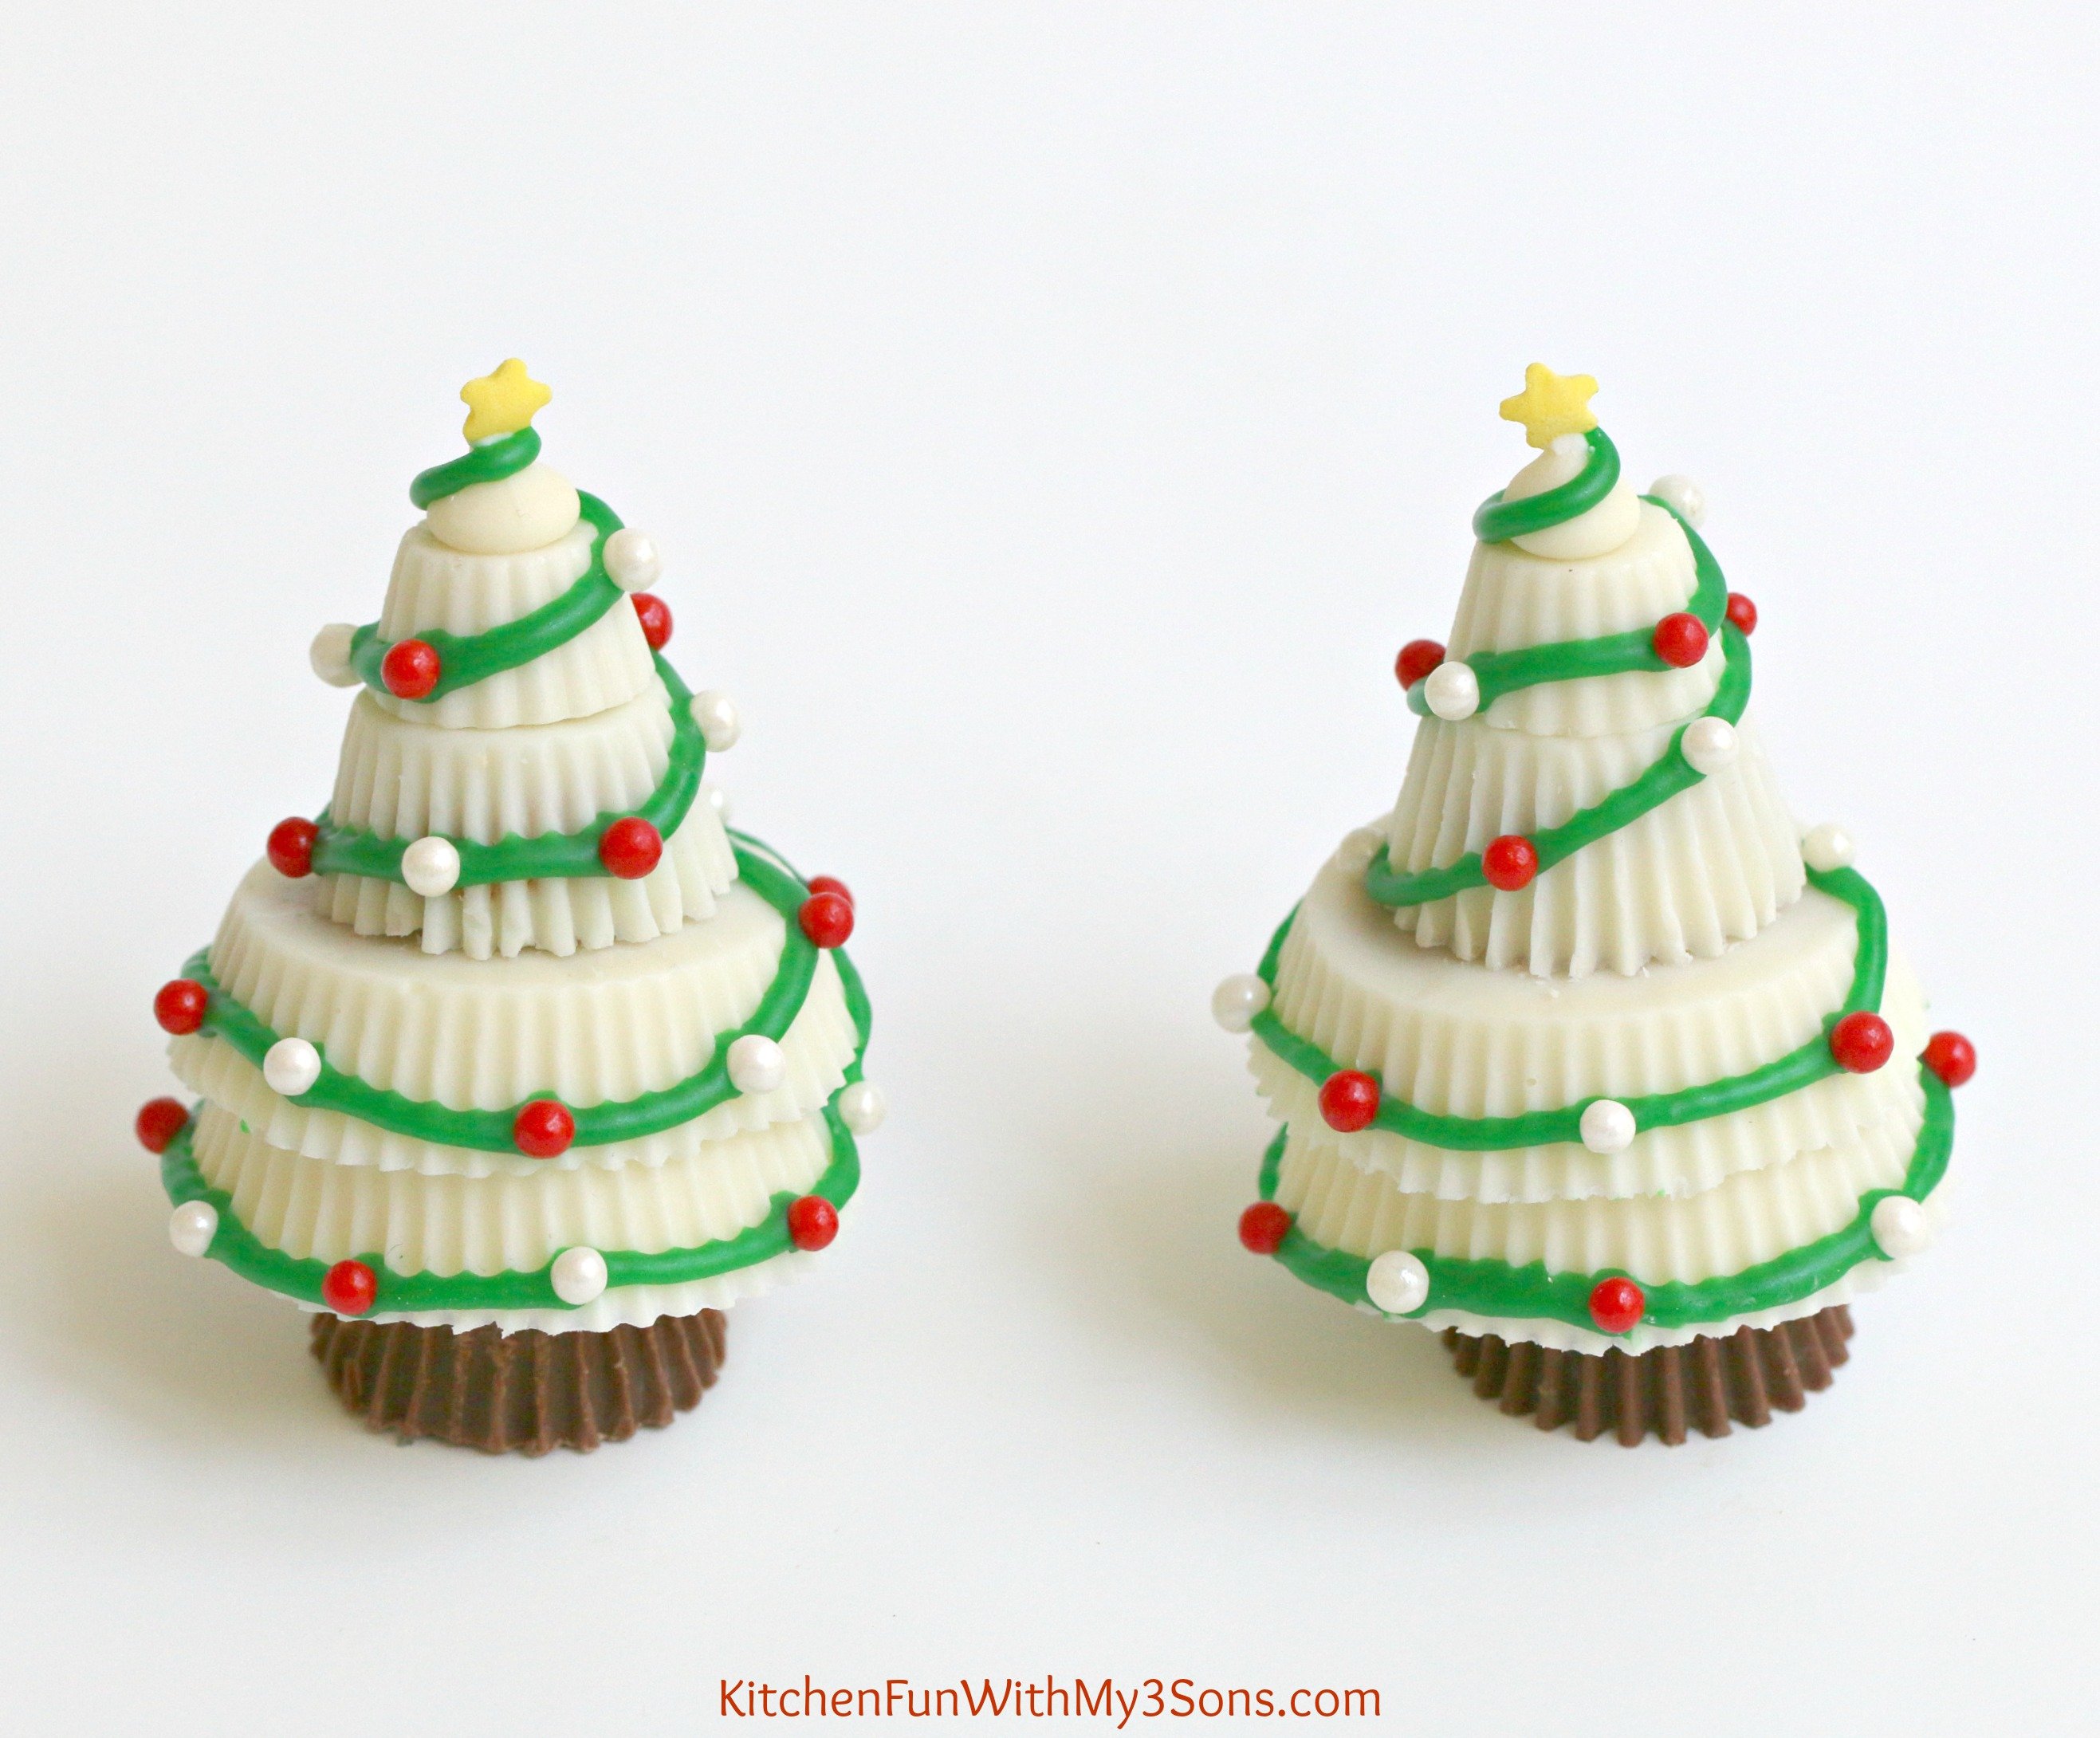 Reese's Peanut Butter Cup Christmas Trees....these are super easy & fun treats that the Kids will love for the Holidays!